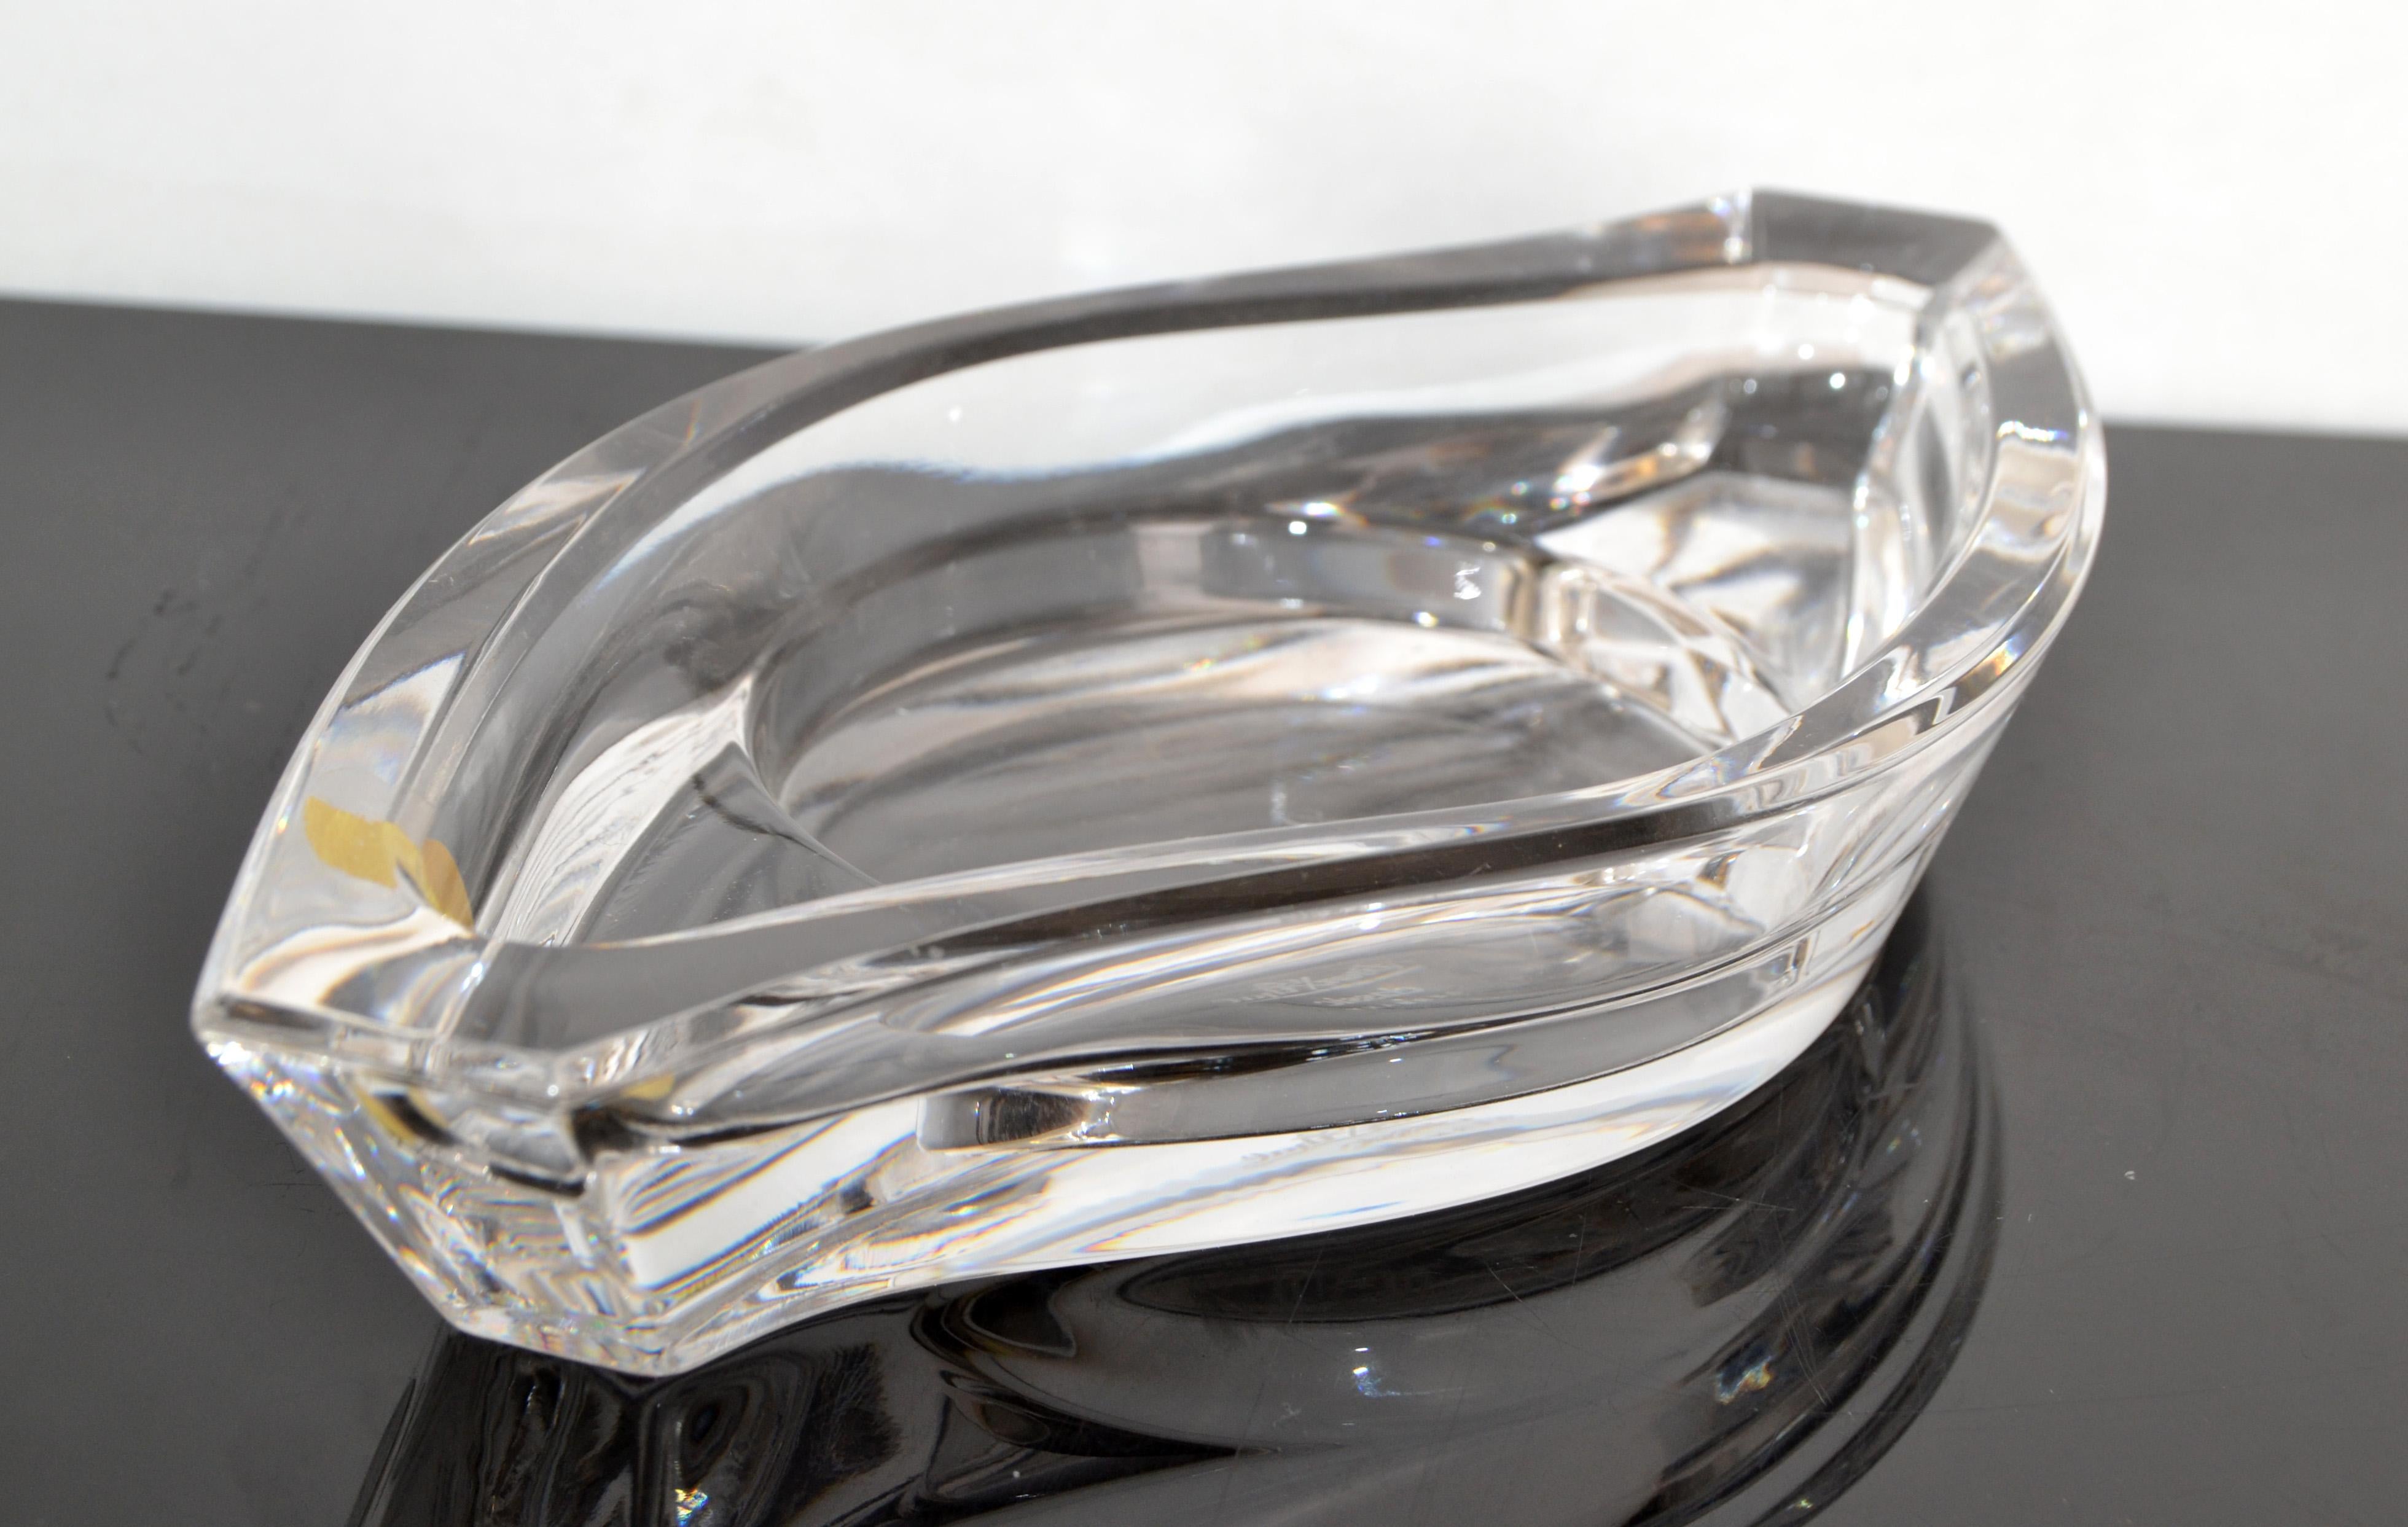 Striking original Rosenthal Space Age Lead crystal glass horizon pillar candle holder, vide poche, catchall, bowl made in Germany. 
To me it looks like the shape of an eye and will look amazing on top of a black credenza, hallway table or